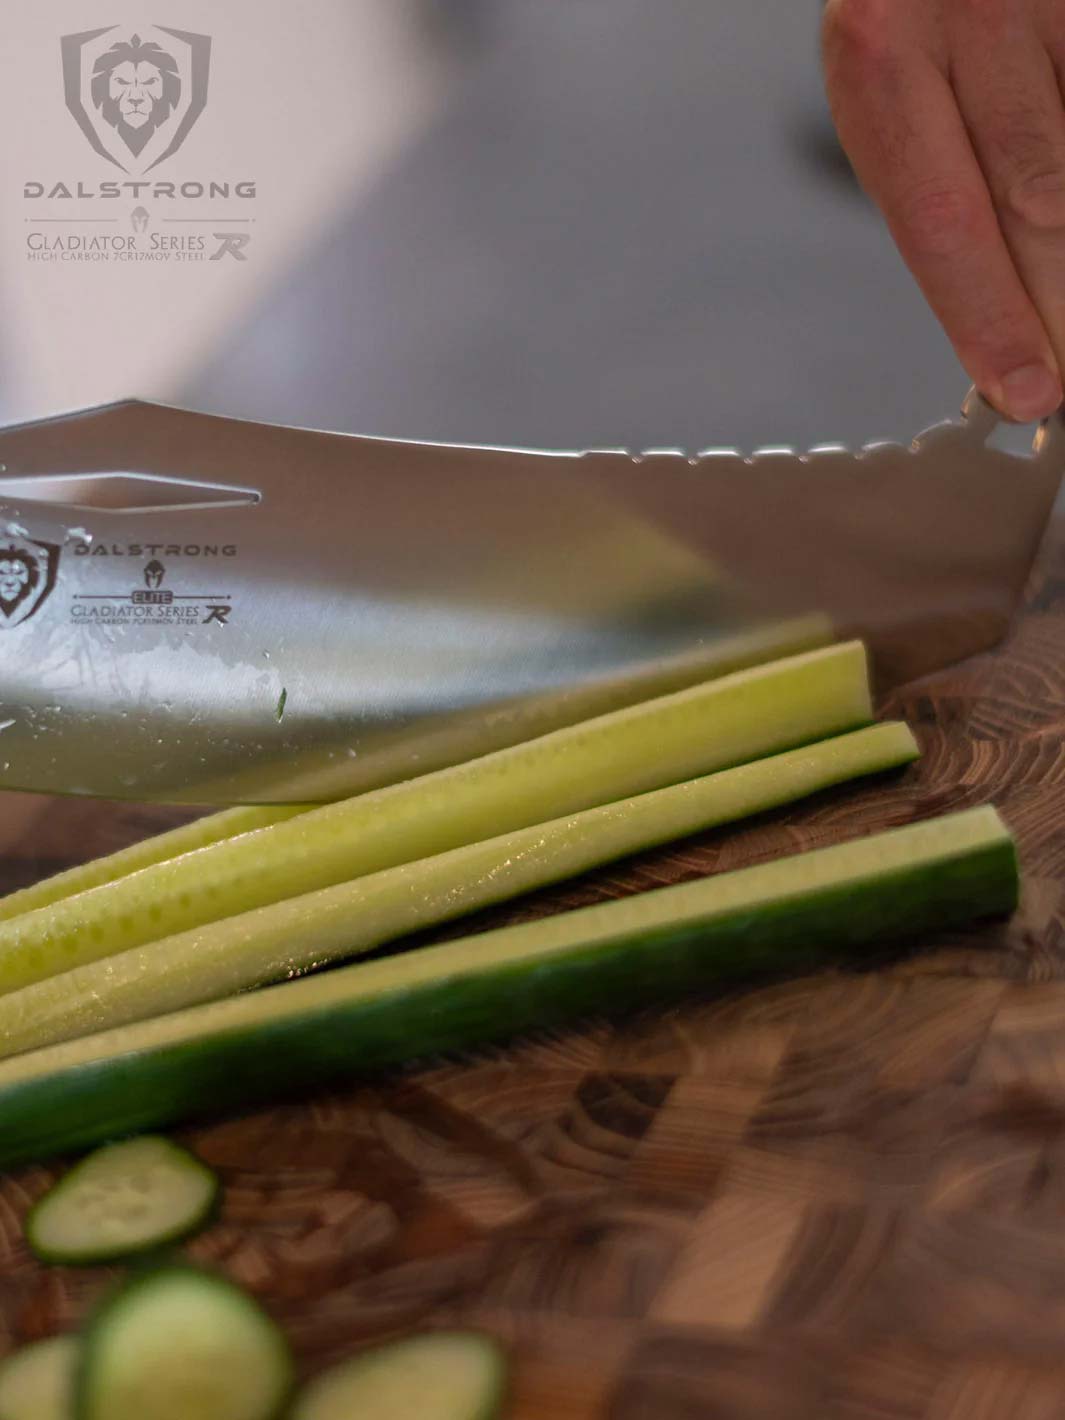 Dalstrong gladiator series 12 inch rocking cleaver knife slicing a green herb on a cutting board.